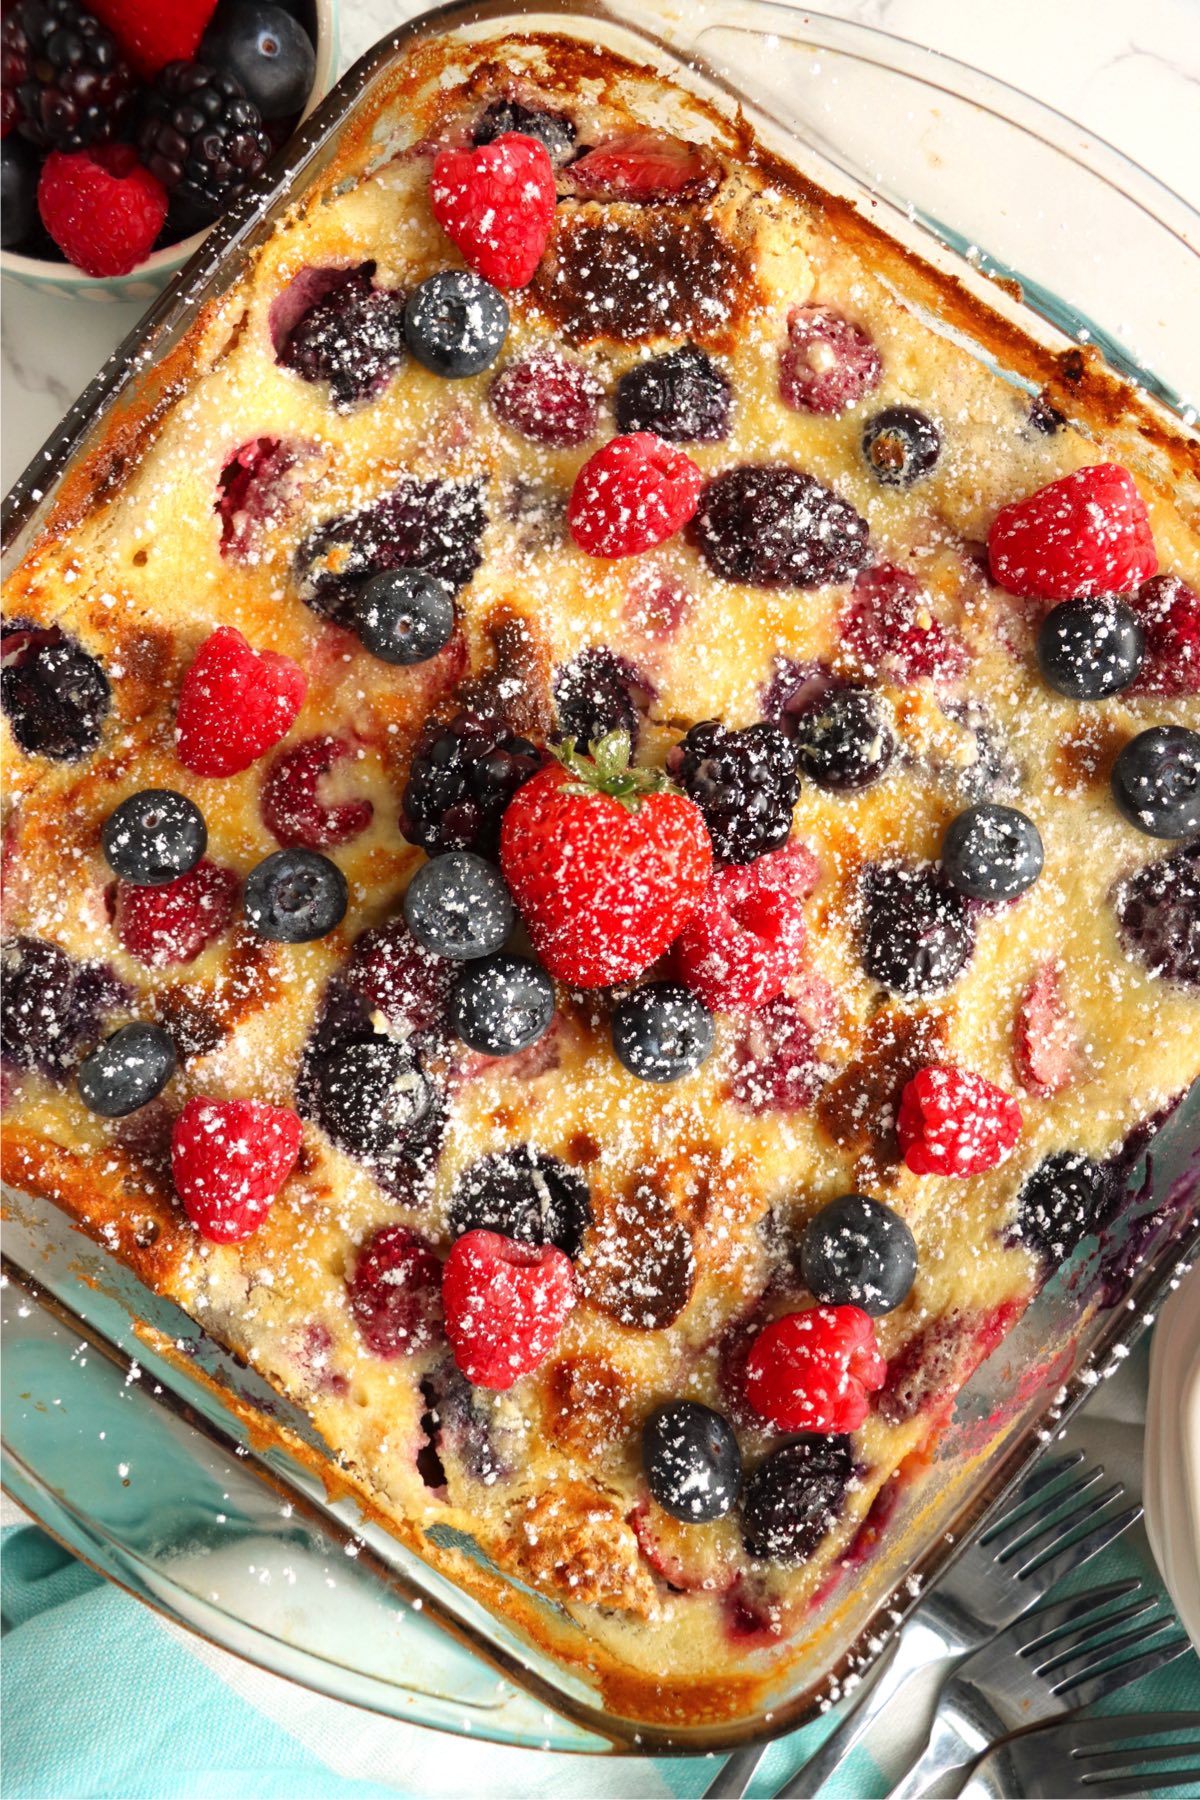 top view of croissant bake with berries